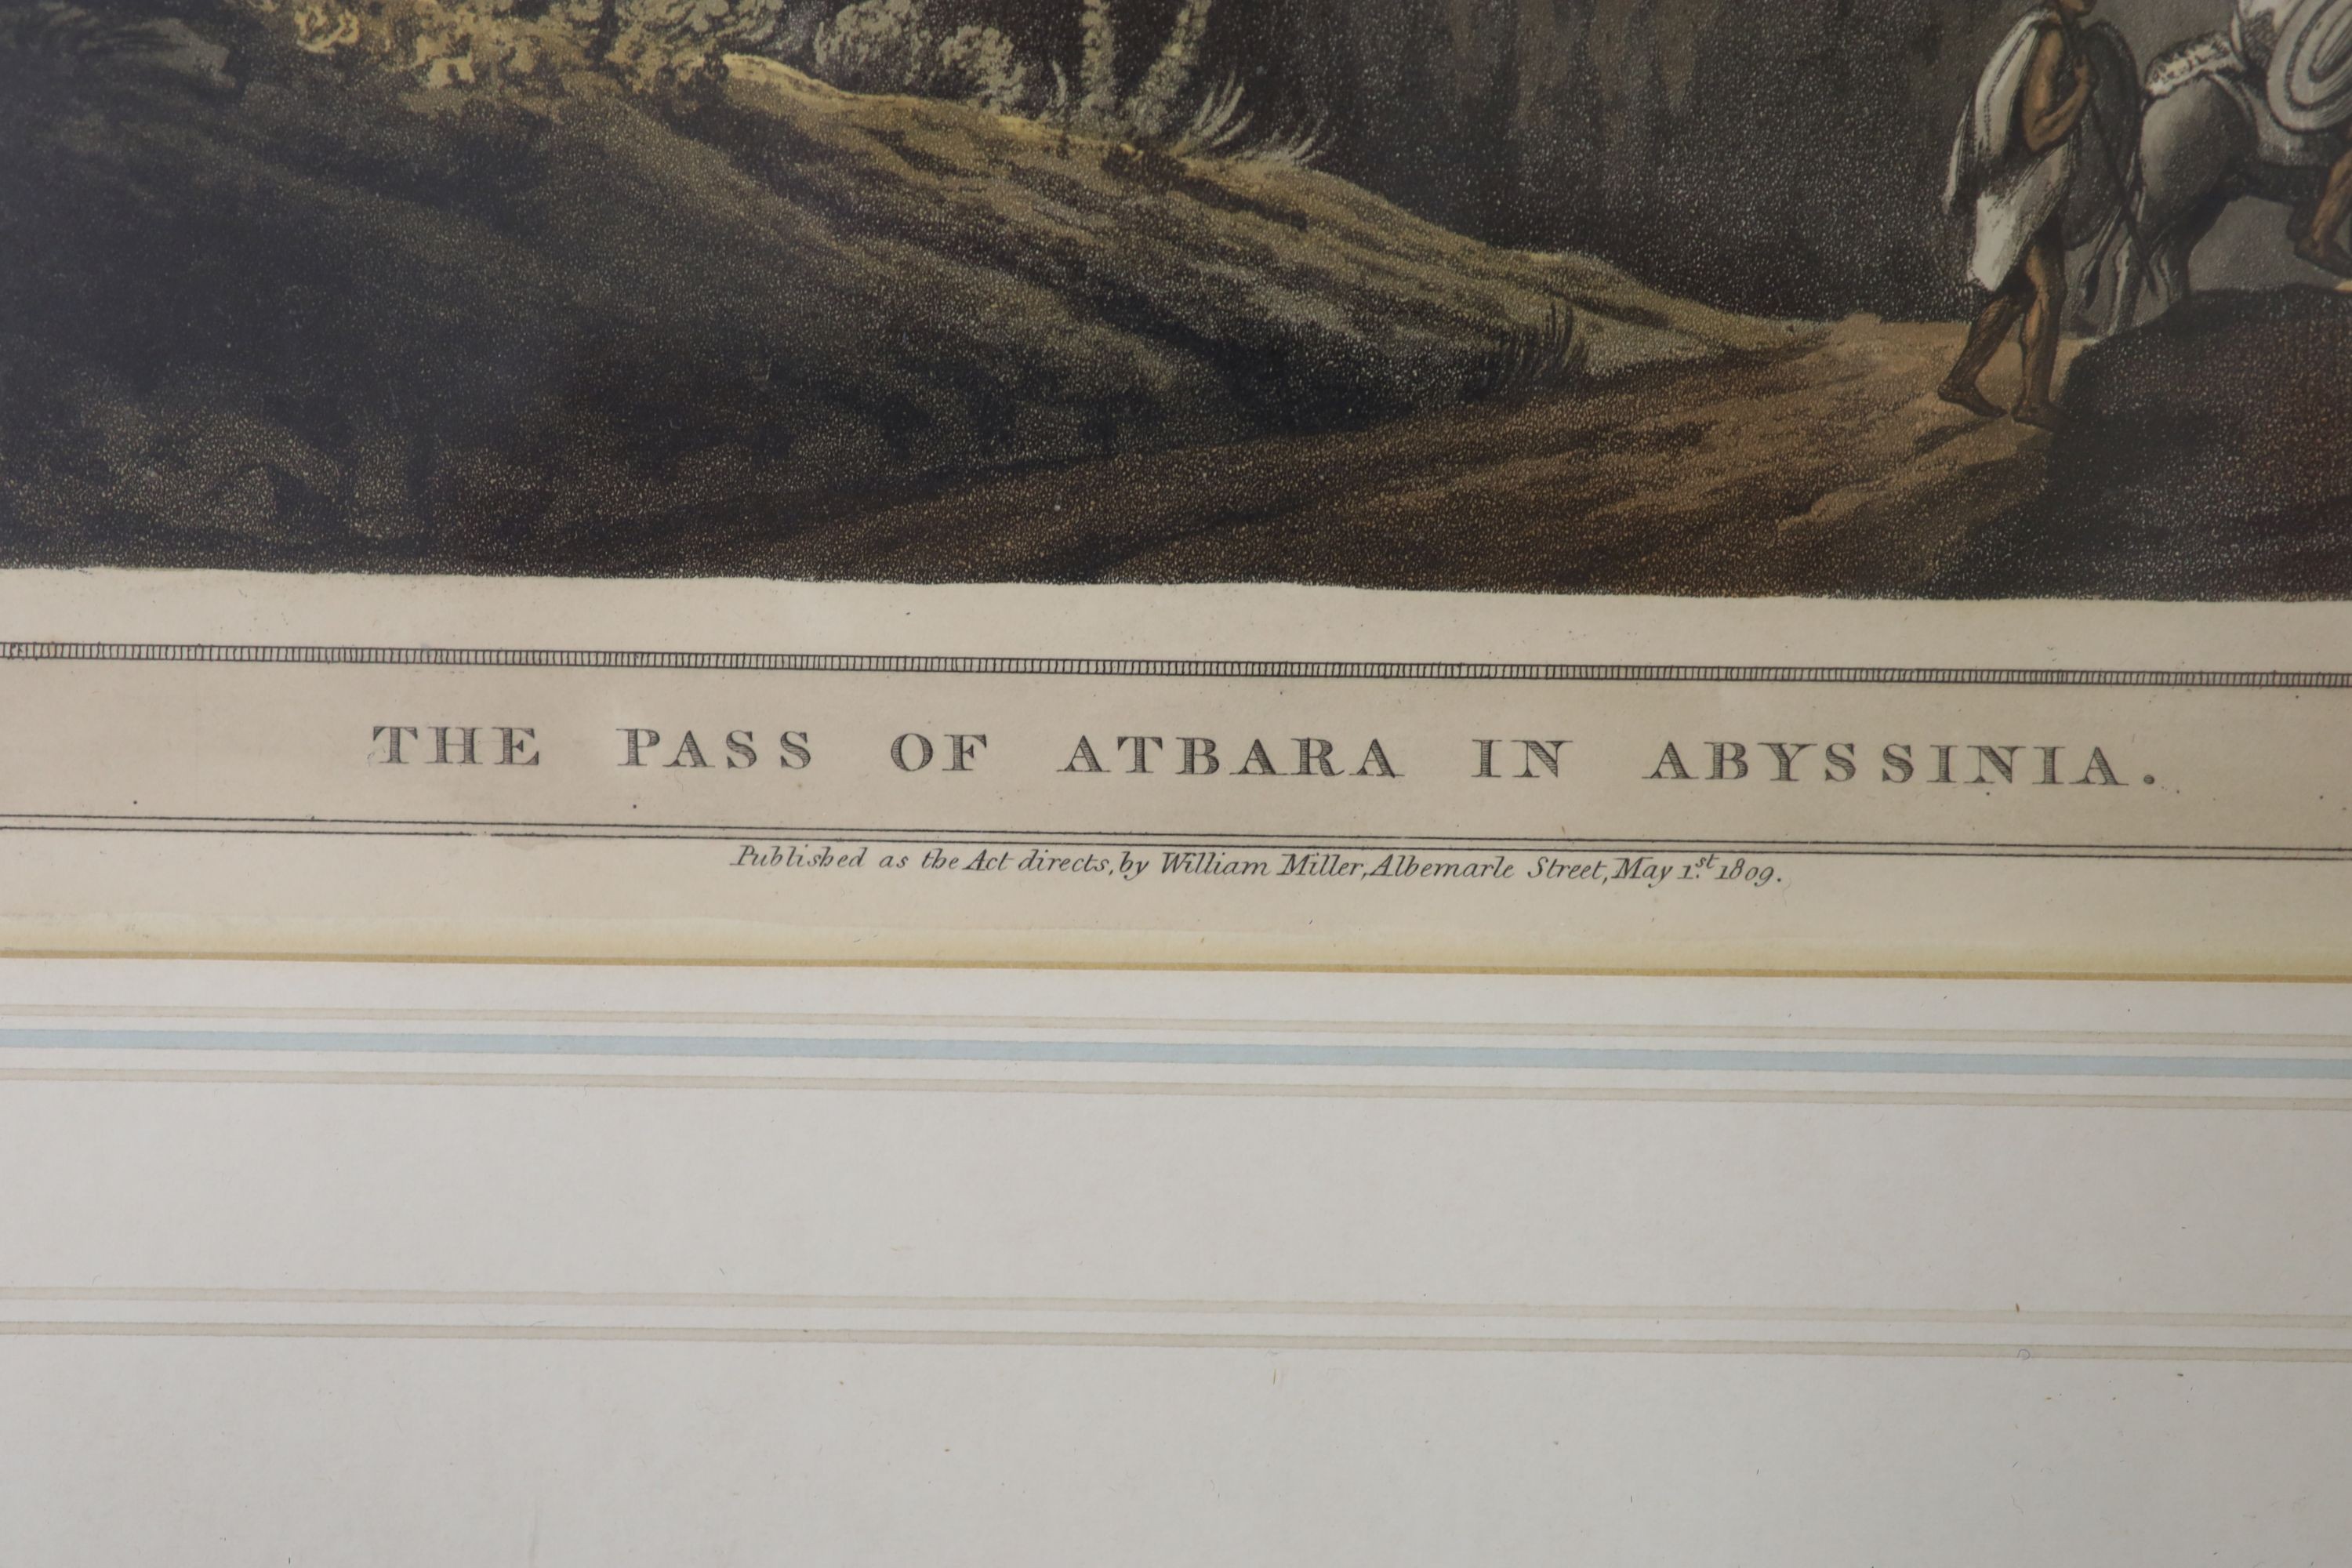 Havell after Henry Salt, coloured aquatint, 'The Pass of Atbara in Abyssinia' 1809, 41 x 59cm